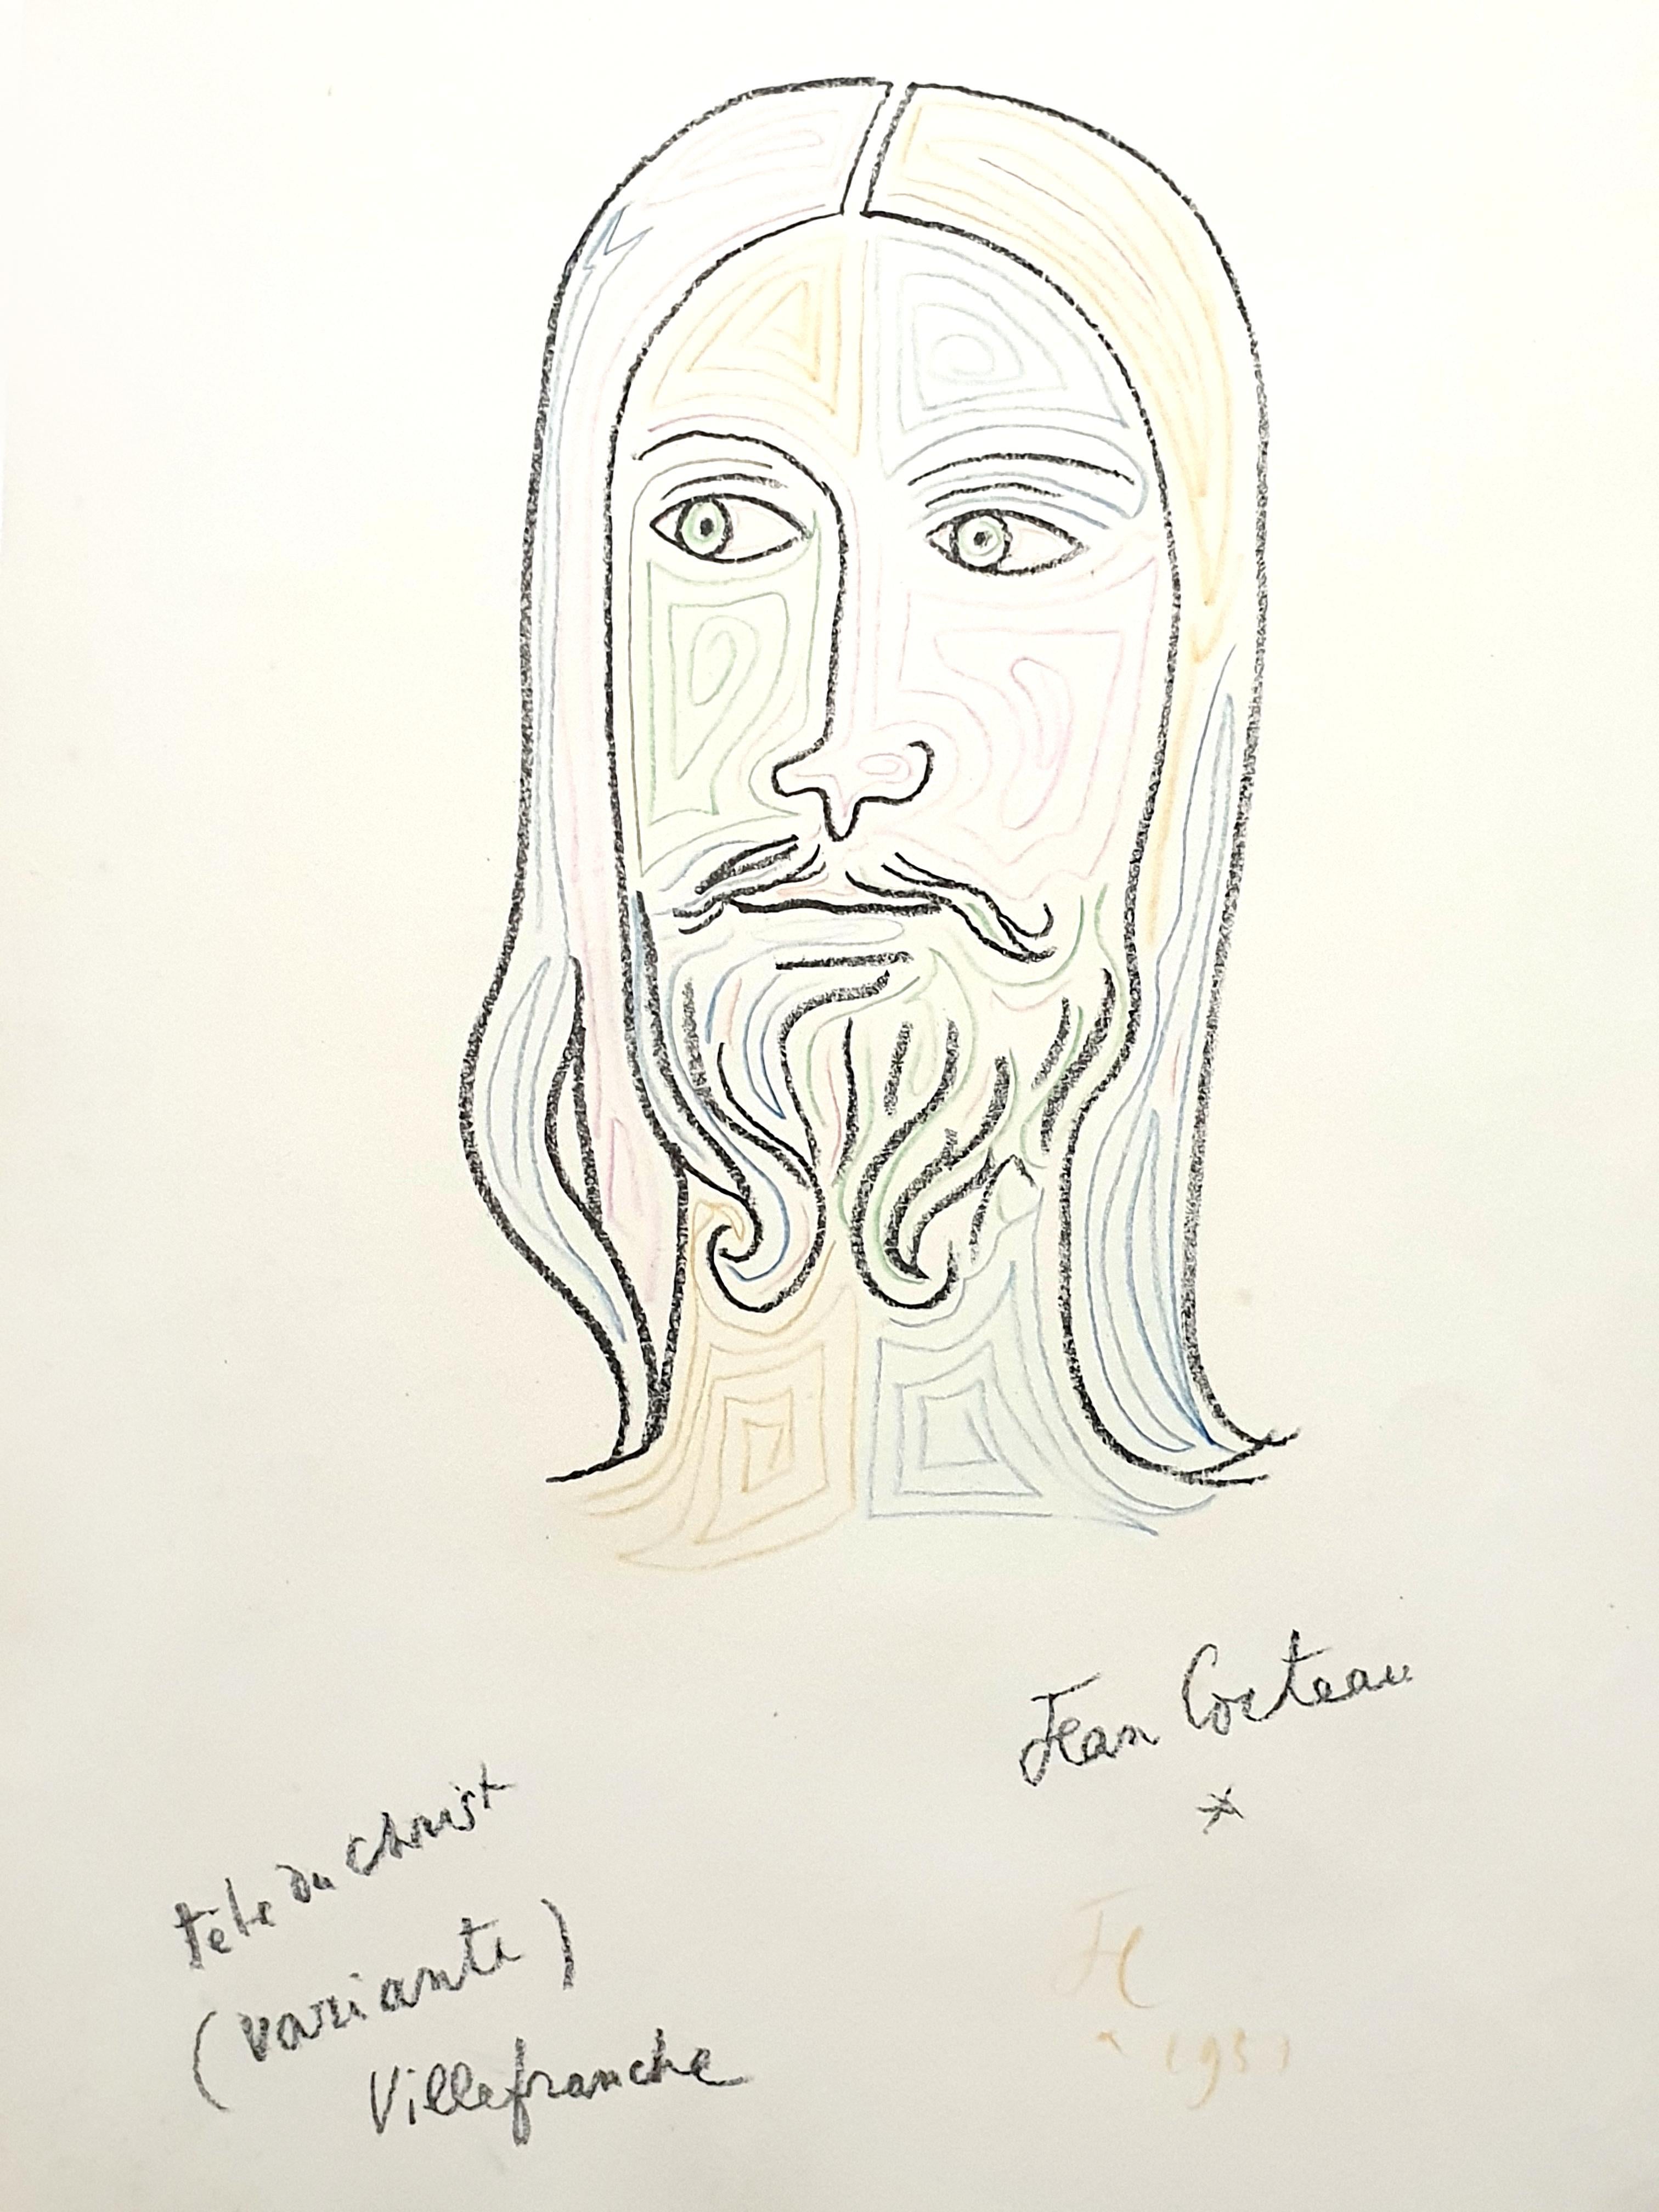 Jean Cocteau - Christ - Original Handsigned and Handcolored Lithograph
Signed in the plate
Handsigned and dated in color pencil.
Handcolored in pencil.
Dimensions: 50.5 x 33 cm
1957
Provenance : Succession Dermit, Cocteau's heir

Jean